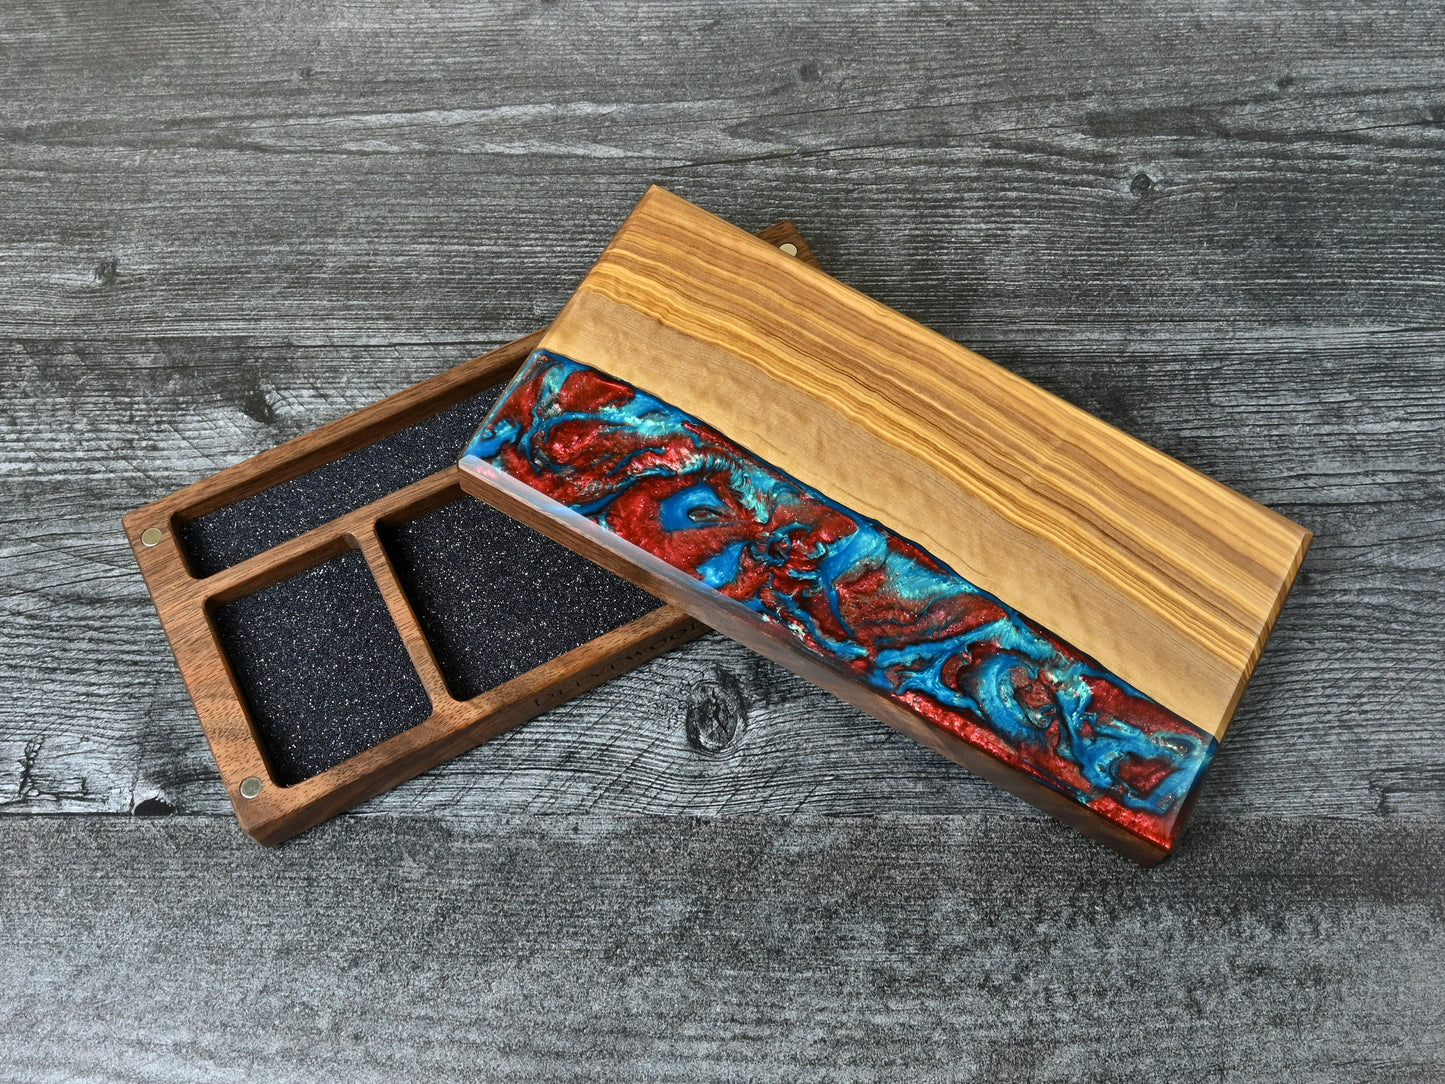 Delver's Kit Dice Box featuring a walnut core and an olivewood top veneer with blue and red resin. Made for D&D ttrpg.